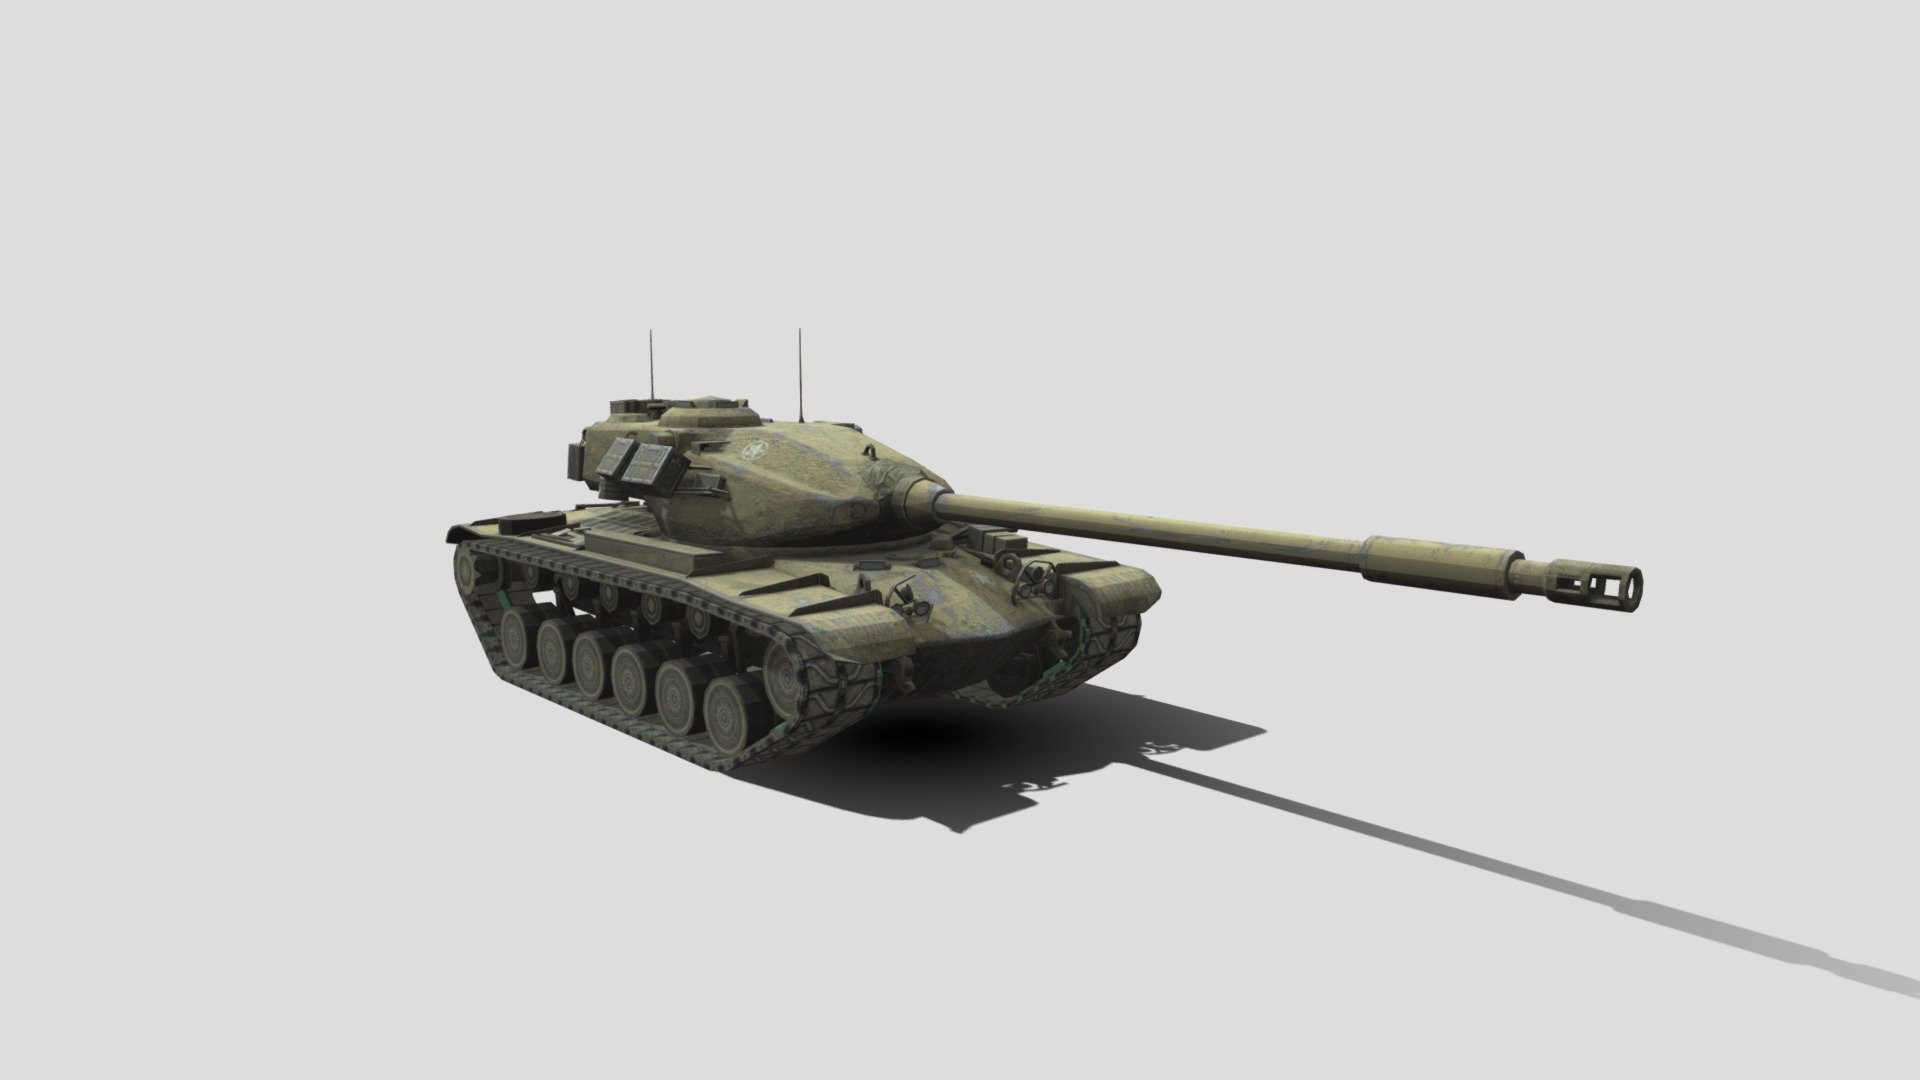 T54E2 - american heavy tank on VIII level in WoT Blitz

PRICE: 5,00$

You can buy this model on my Boosty page

There is problem with prewiew model, but in the files everithing OK :)

Please pay attention!
These are models by another author, namely Wargaming. I do not assign authorship to myself and take money only for the work I have done, namely to give you the opportunity to use them. Models and textures are imported from the game World of Tanks Blitz. If necessary, I will be ready to somehow conduct a dialogue about copyright, I repeat, I am not going to privatize someone else's work.
You can also ask for any model you wish, the price is negotiable.

BOOSTY LINK:
https://boosty.to/hleb_hlb - T54E2 - 3D model by Dmitry Hlebov (@hleb_hlb) 3d model